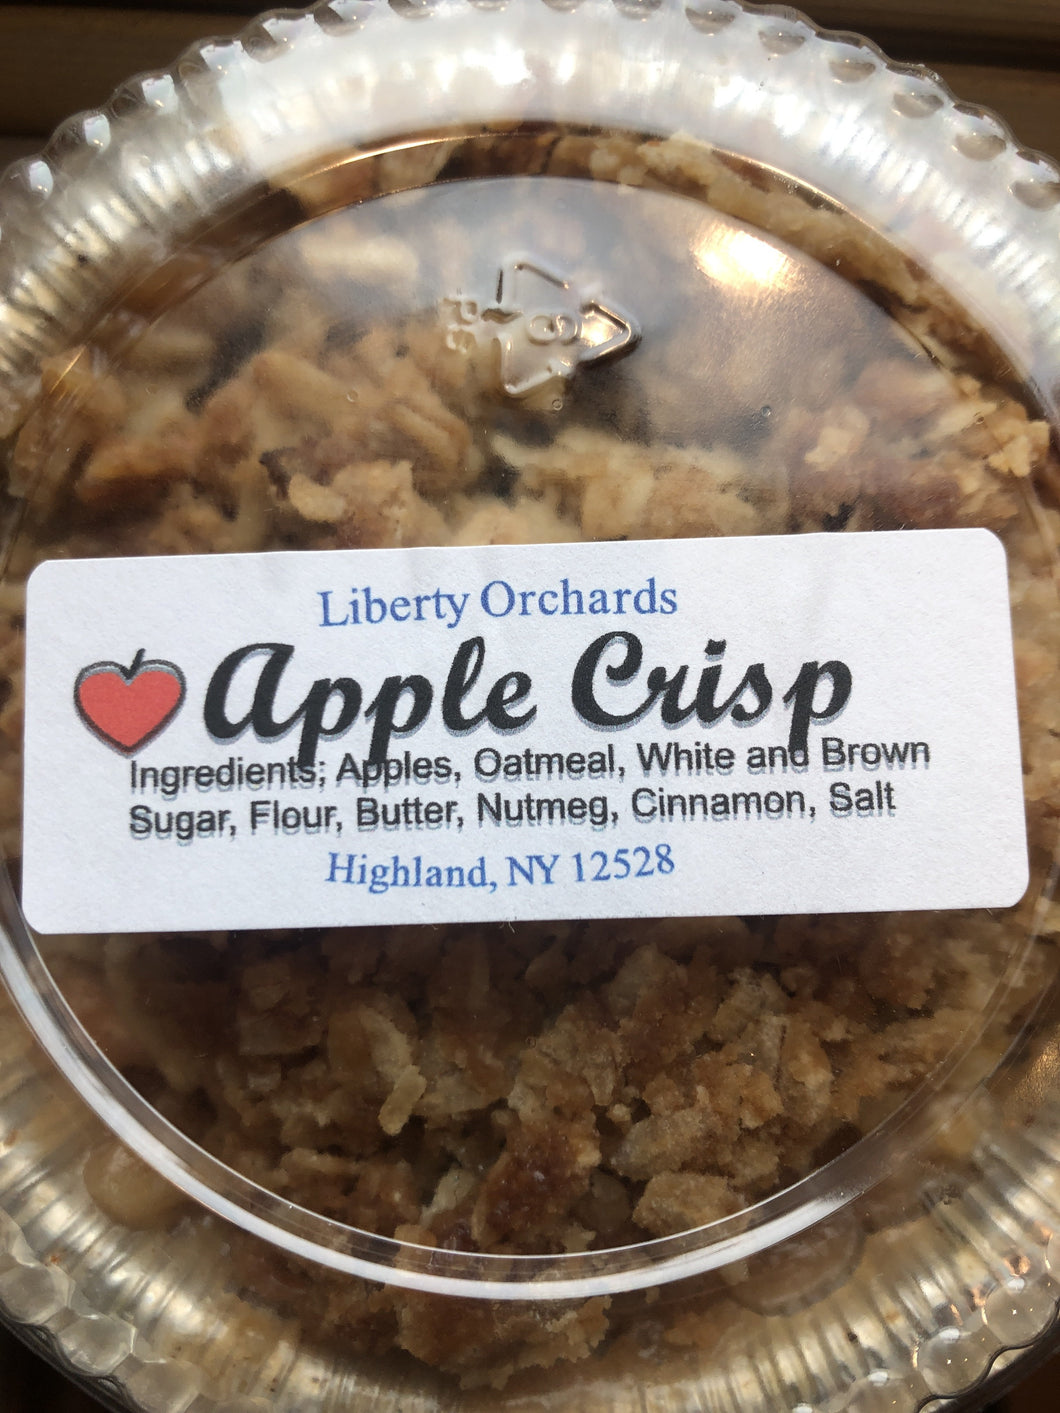 Delicious apple crisp made with cinnamon, apples, and oat strudel topping.  Freshly baked, single serving.